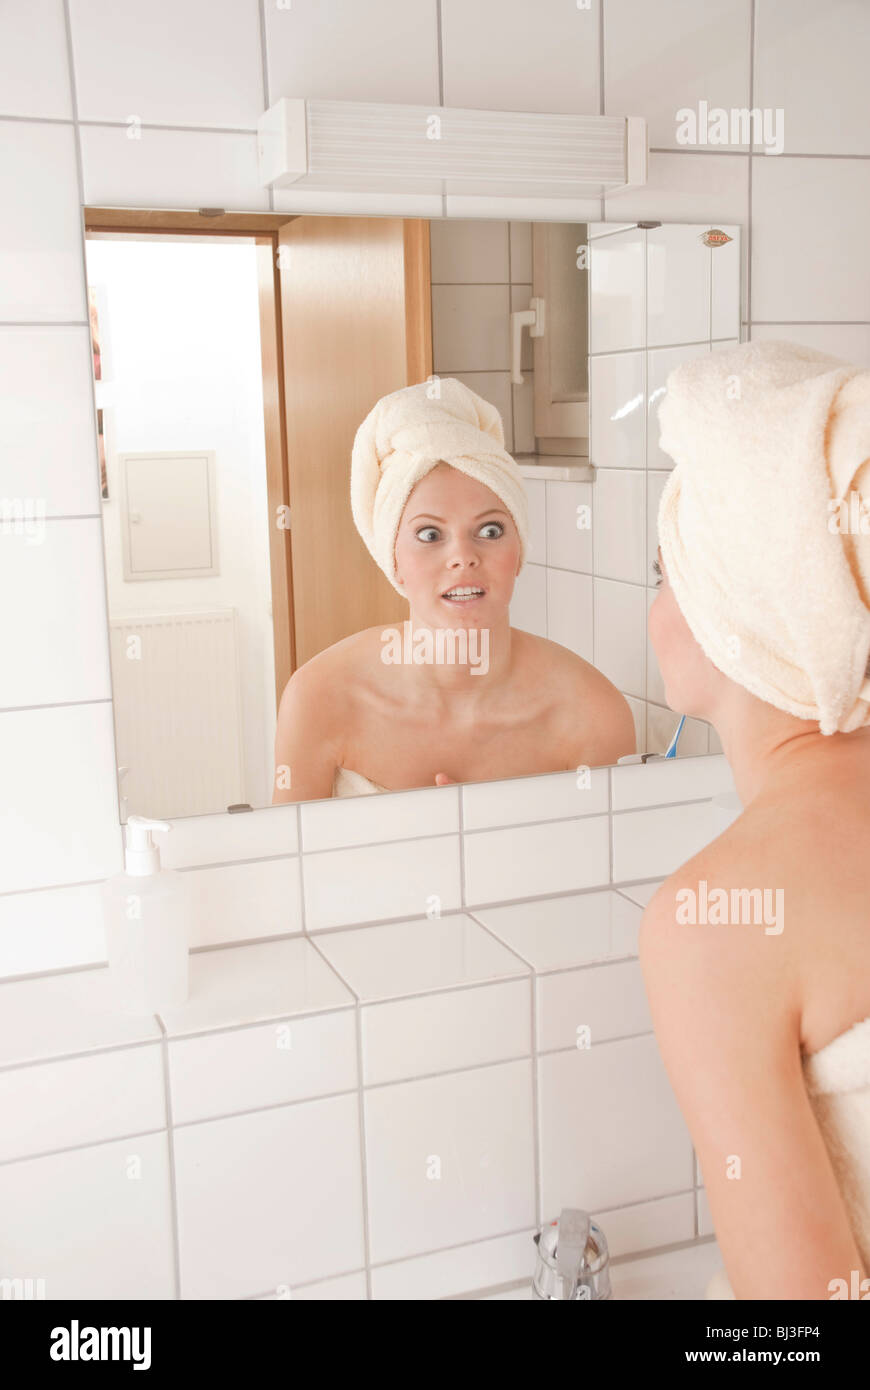 Young woman with a towel wrapped around her head in front of a mirror Stock Photo